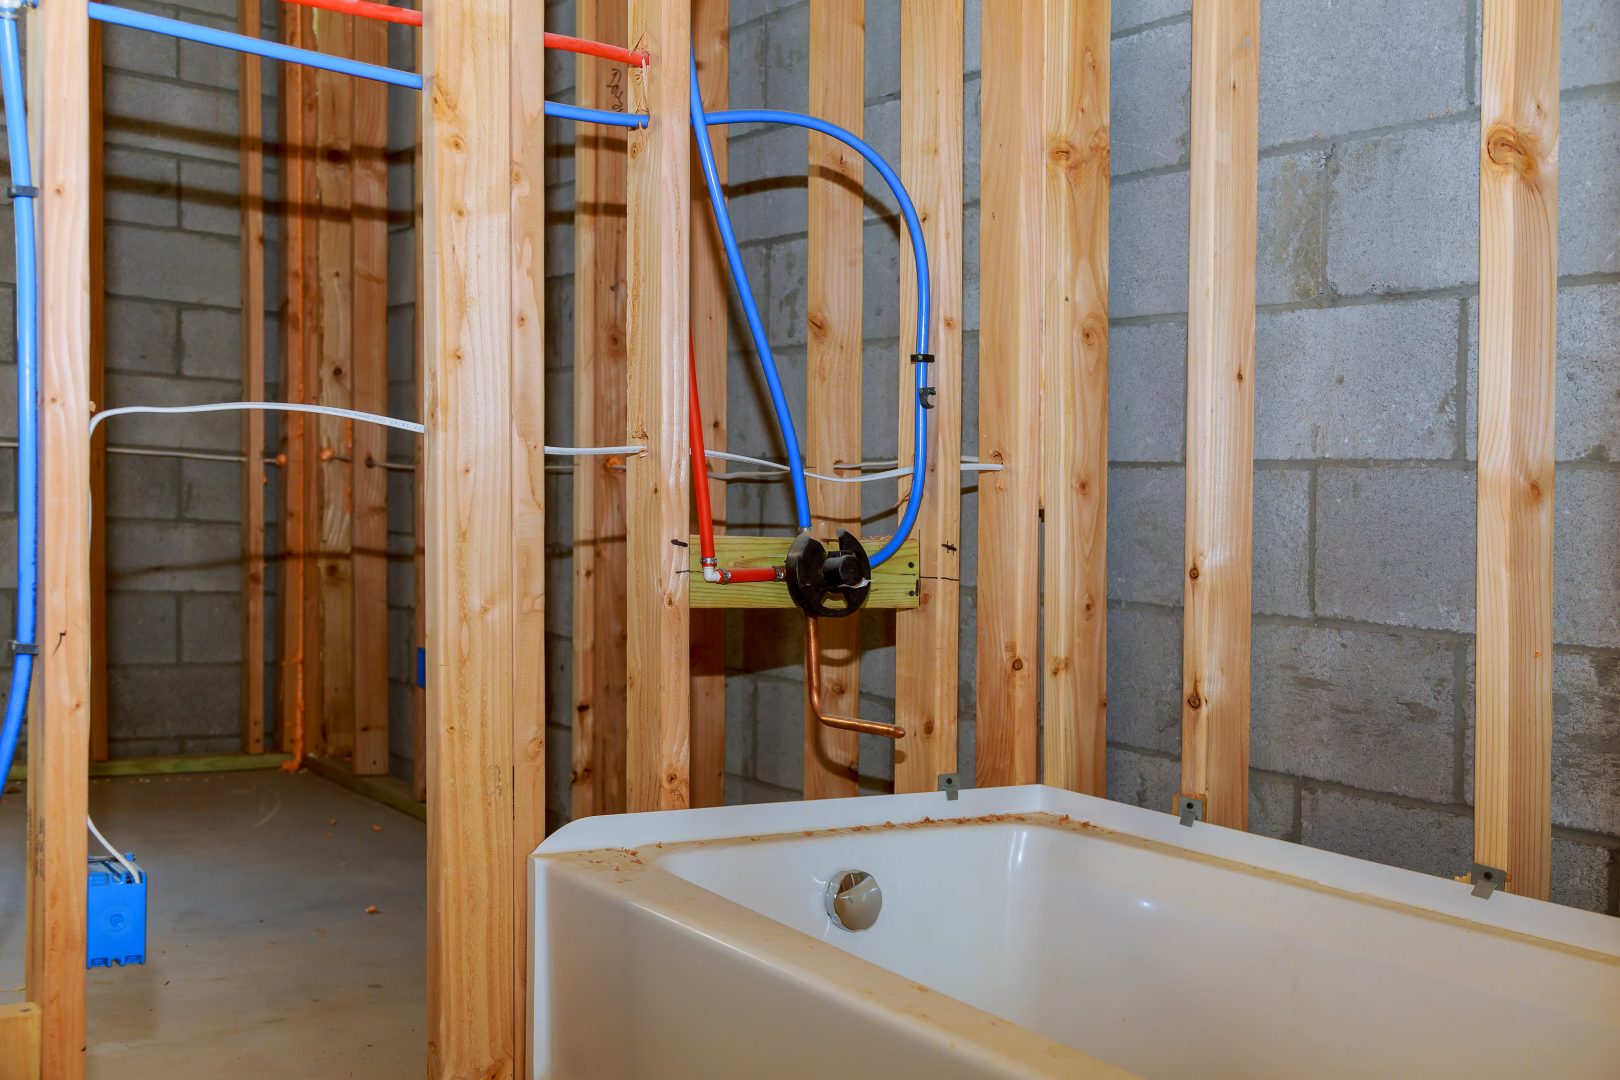 Innovative Plumbing Solutions for Sustainable Housing